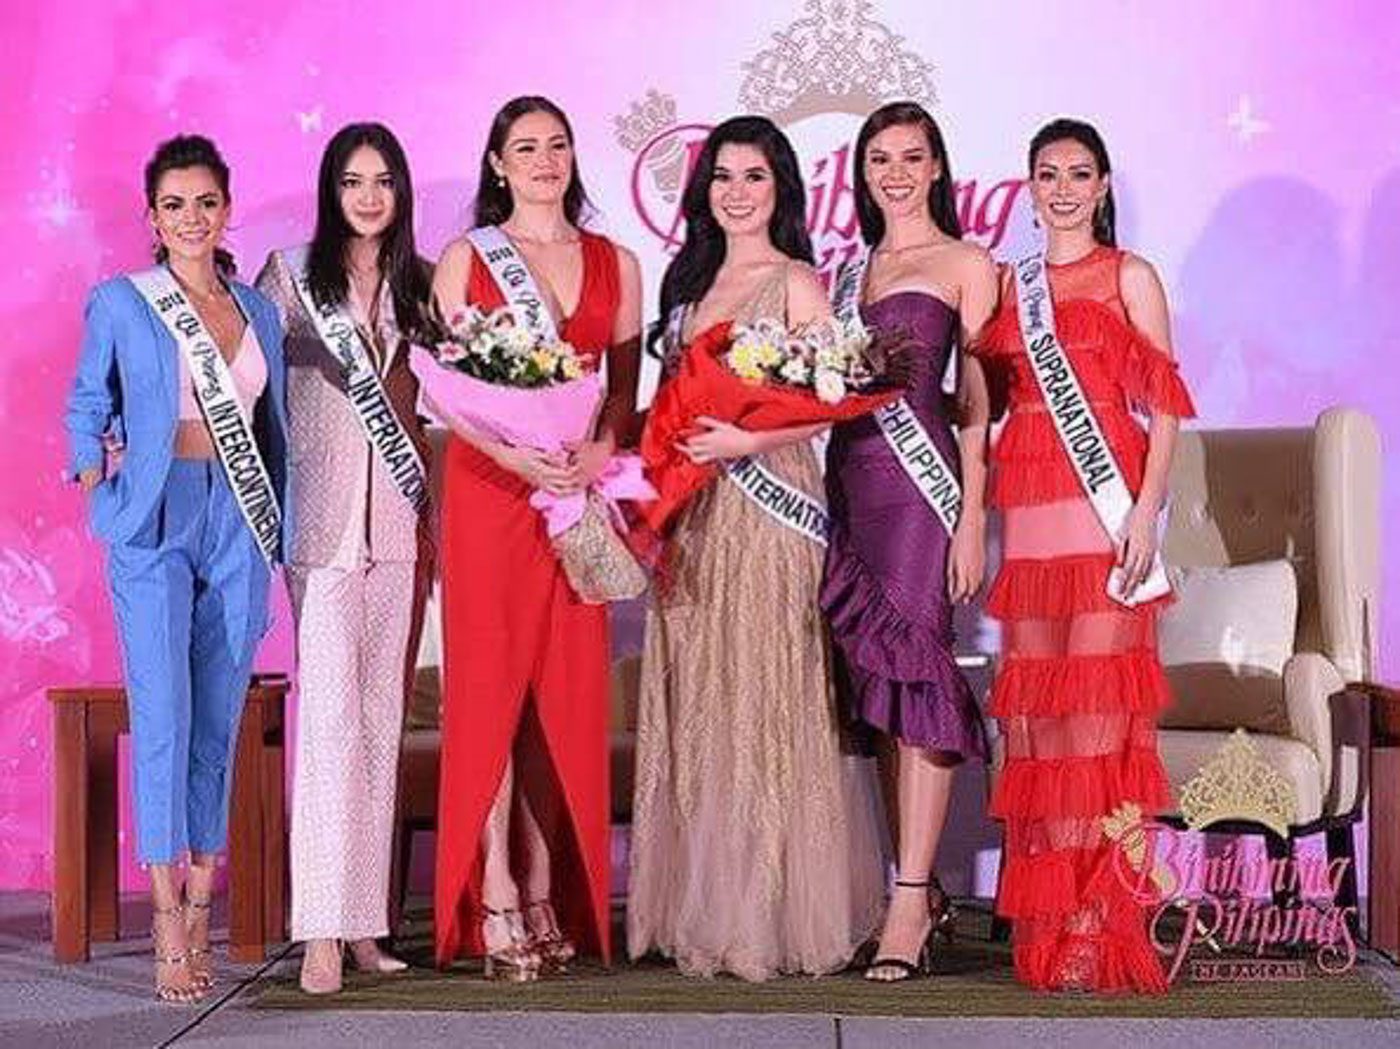 SUPPORT. Karen Gallman, Ahtisa Manalo, Catriona Gray, and Jehza Huelar show their support for Michele and Eva. 